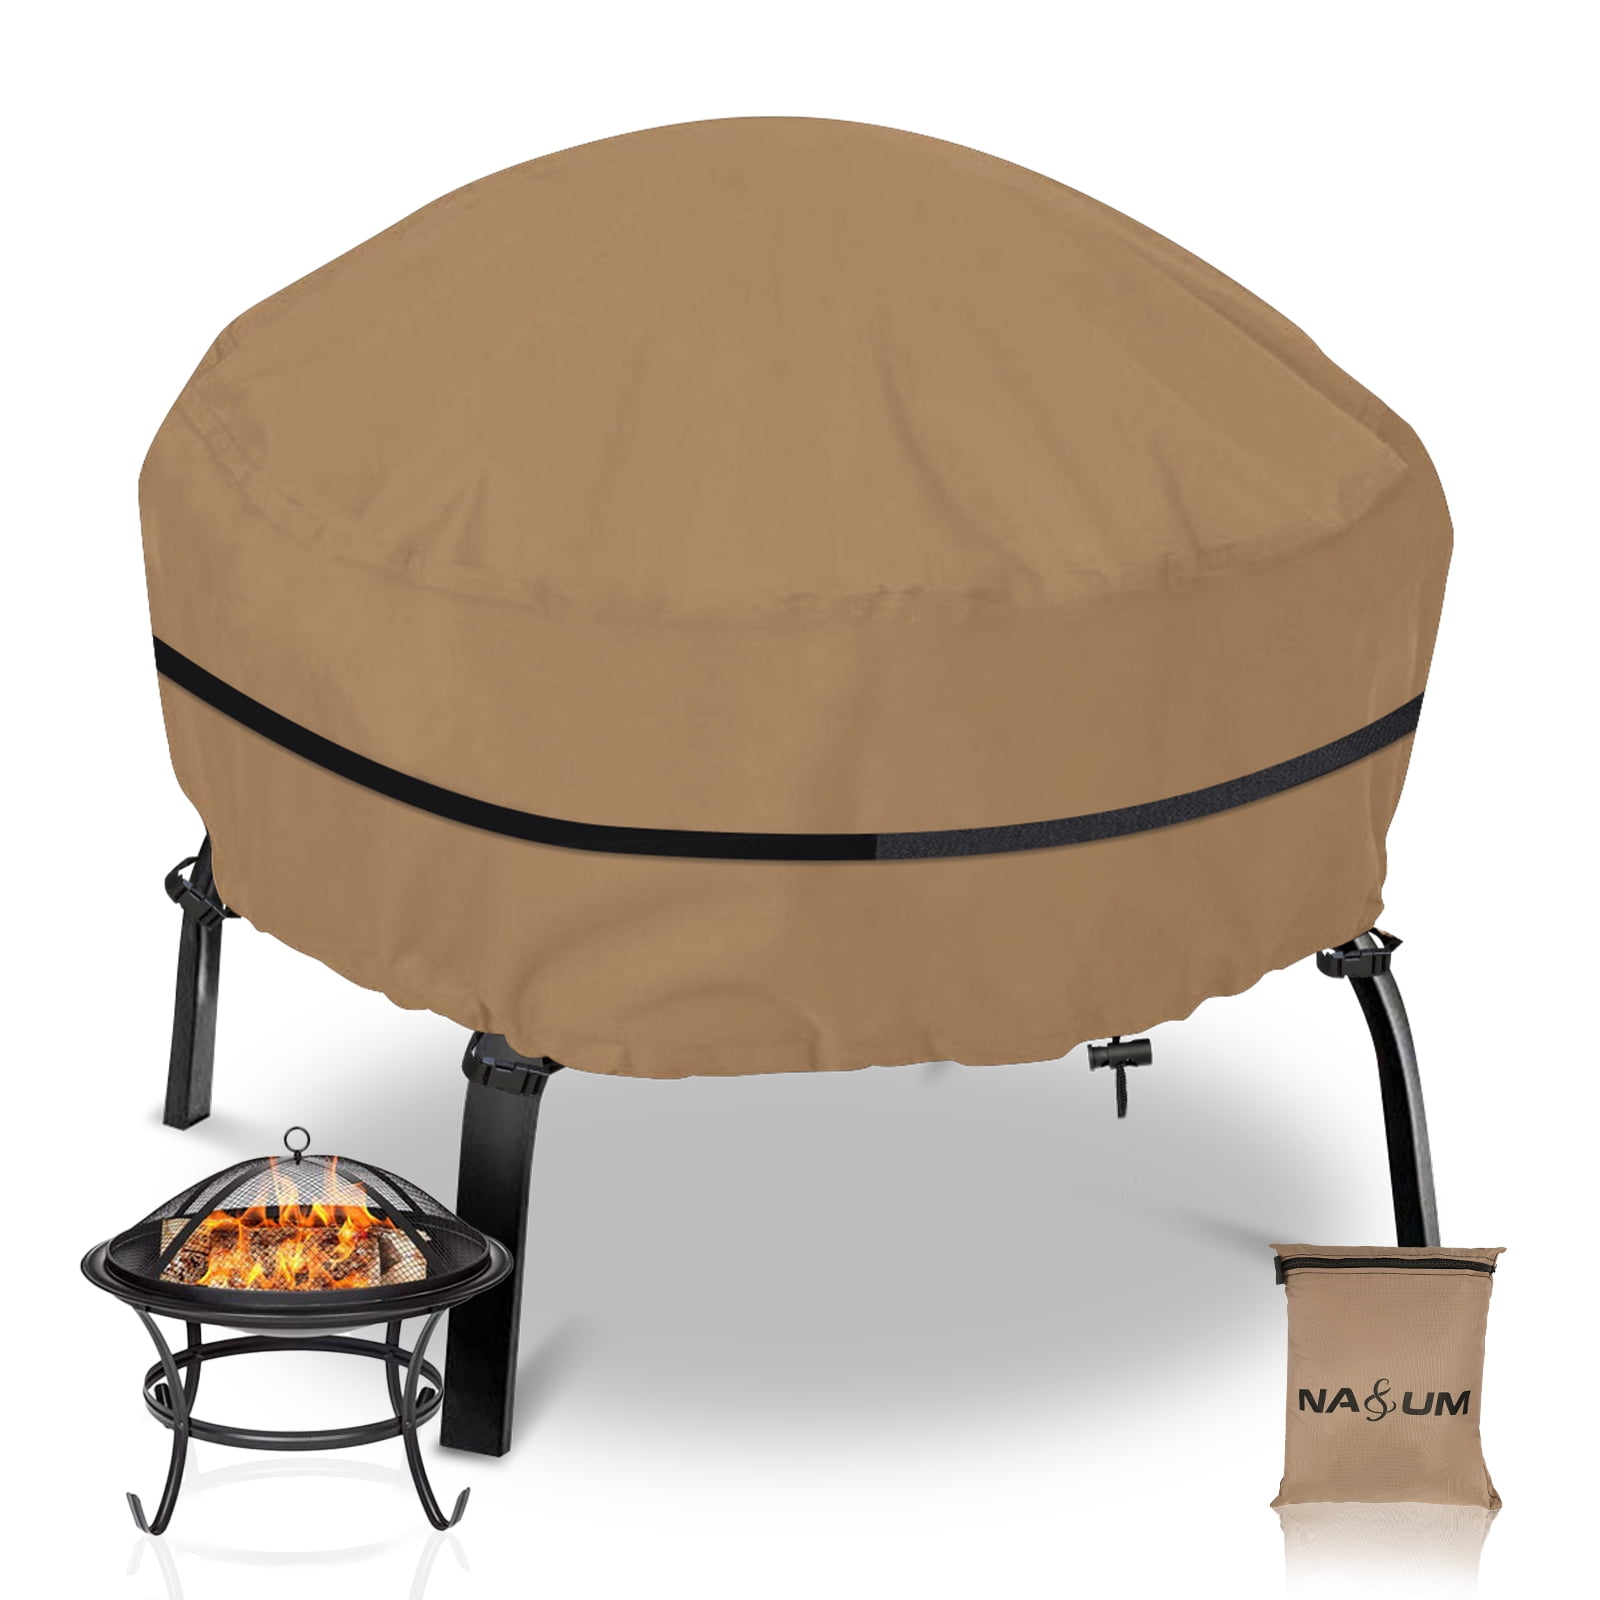 Waterproof 420d Patio Fire Bowl Cover, 32 Inch Round Metal Fire Pit Cover